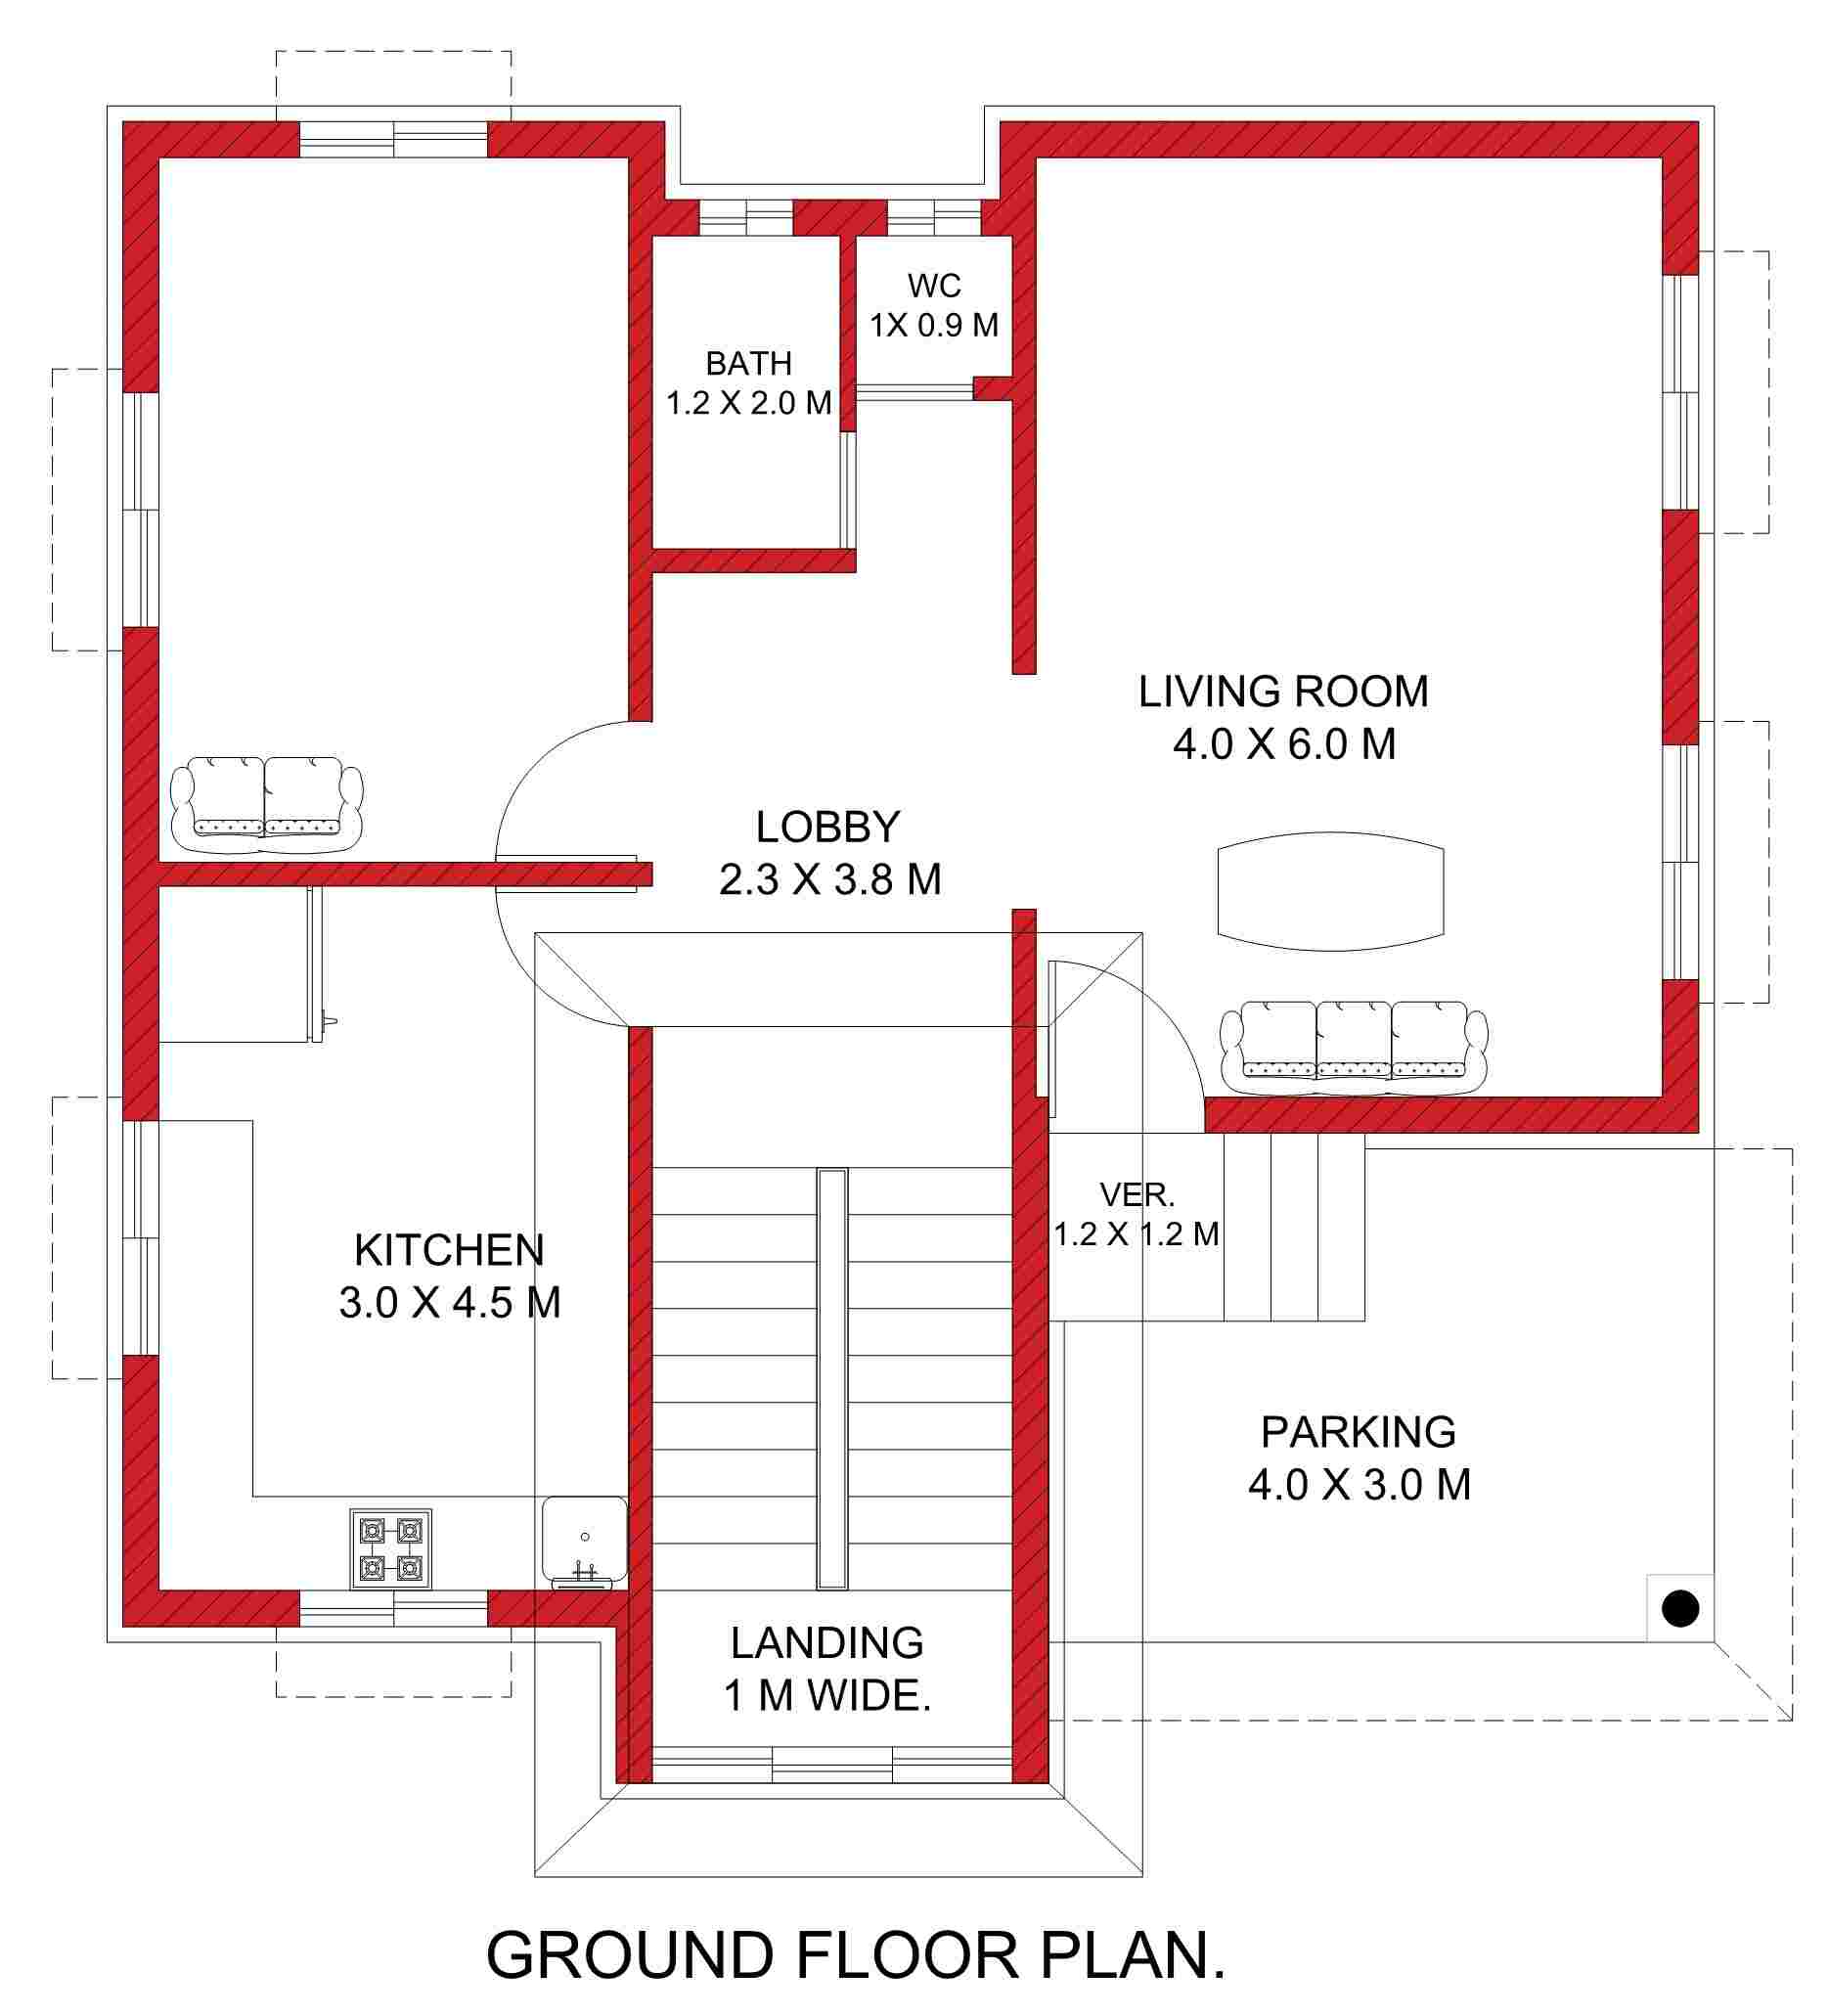 I Will make a 2D Floor Plan in AutoCAD